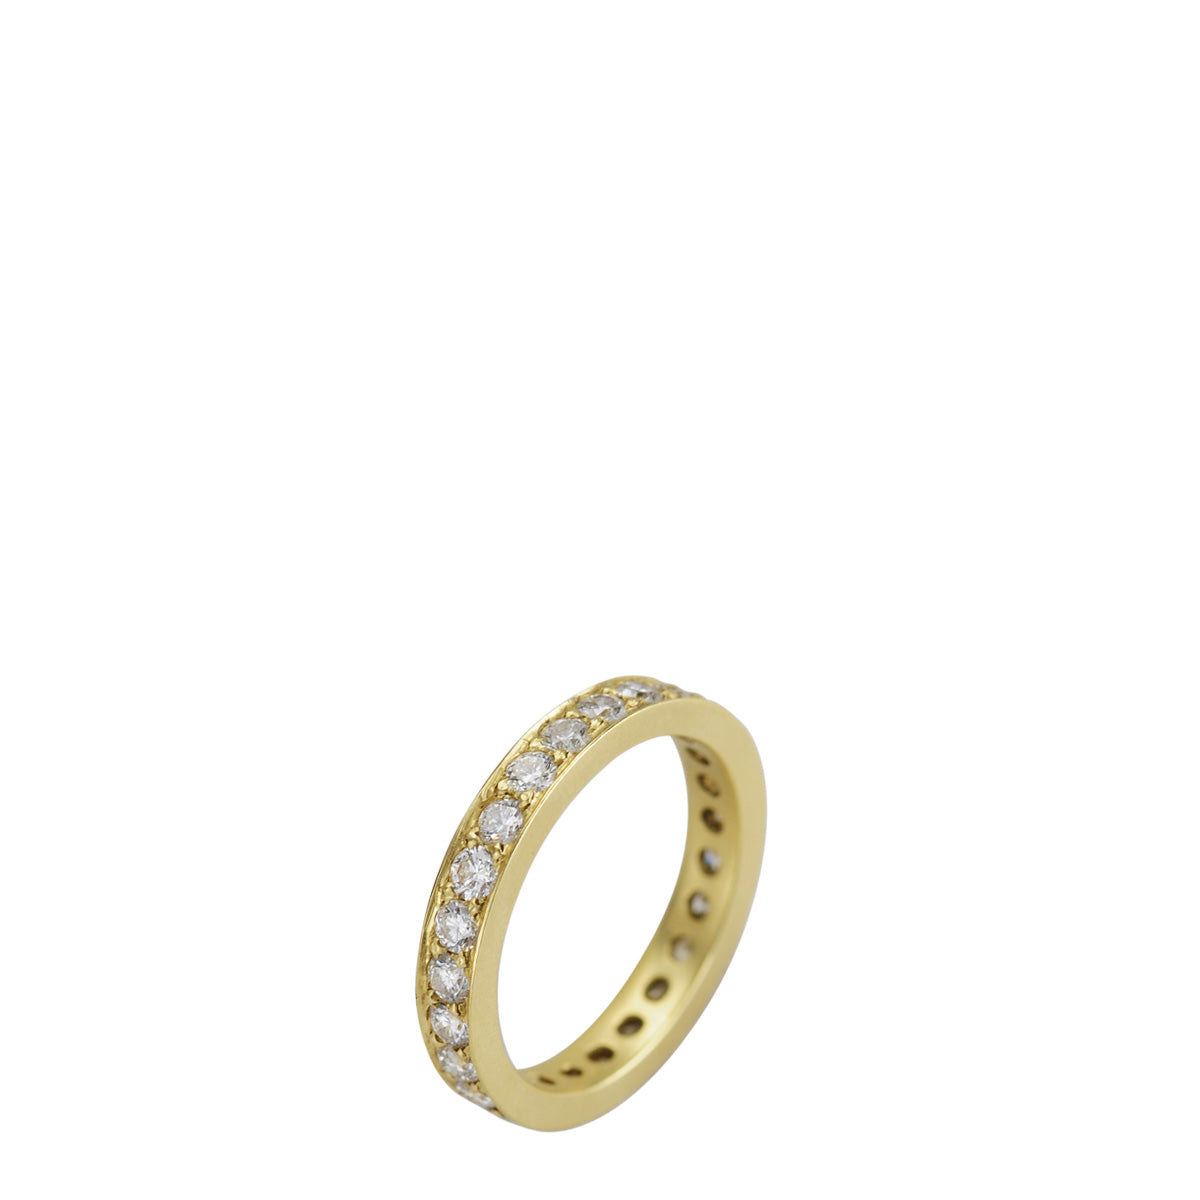 18K Gold 3.5mm Band with 2.5mm Brilliant Cut Diamonds